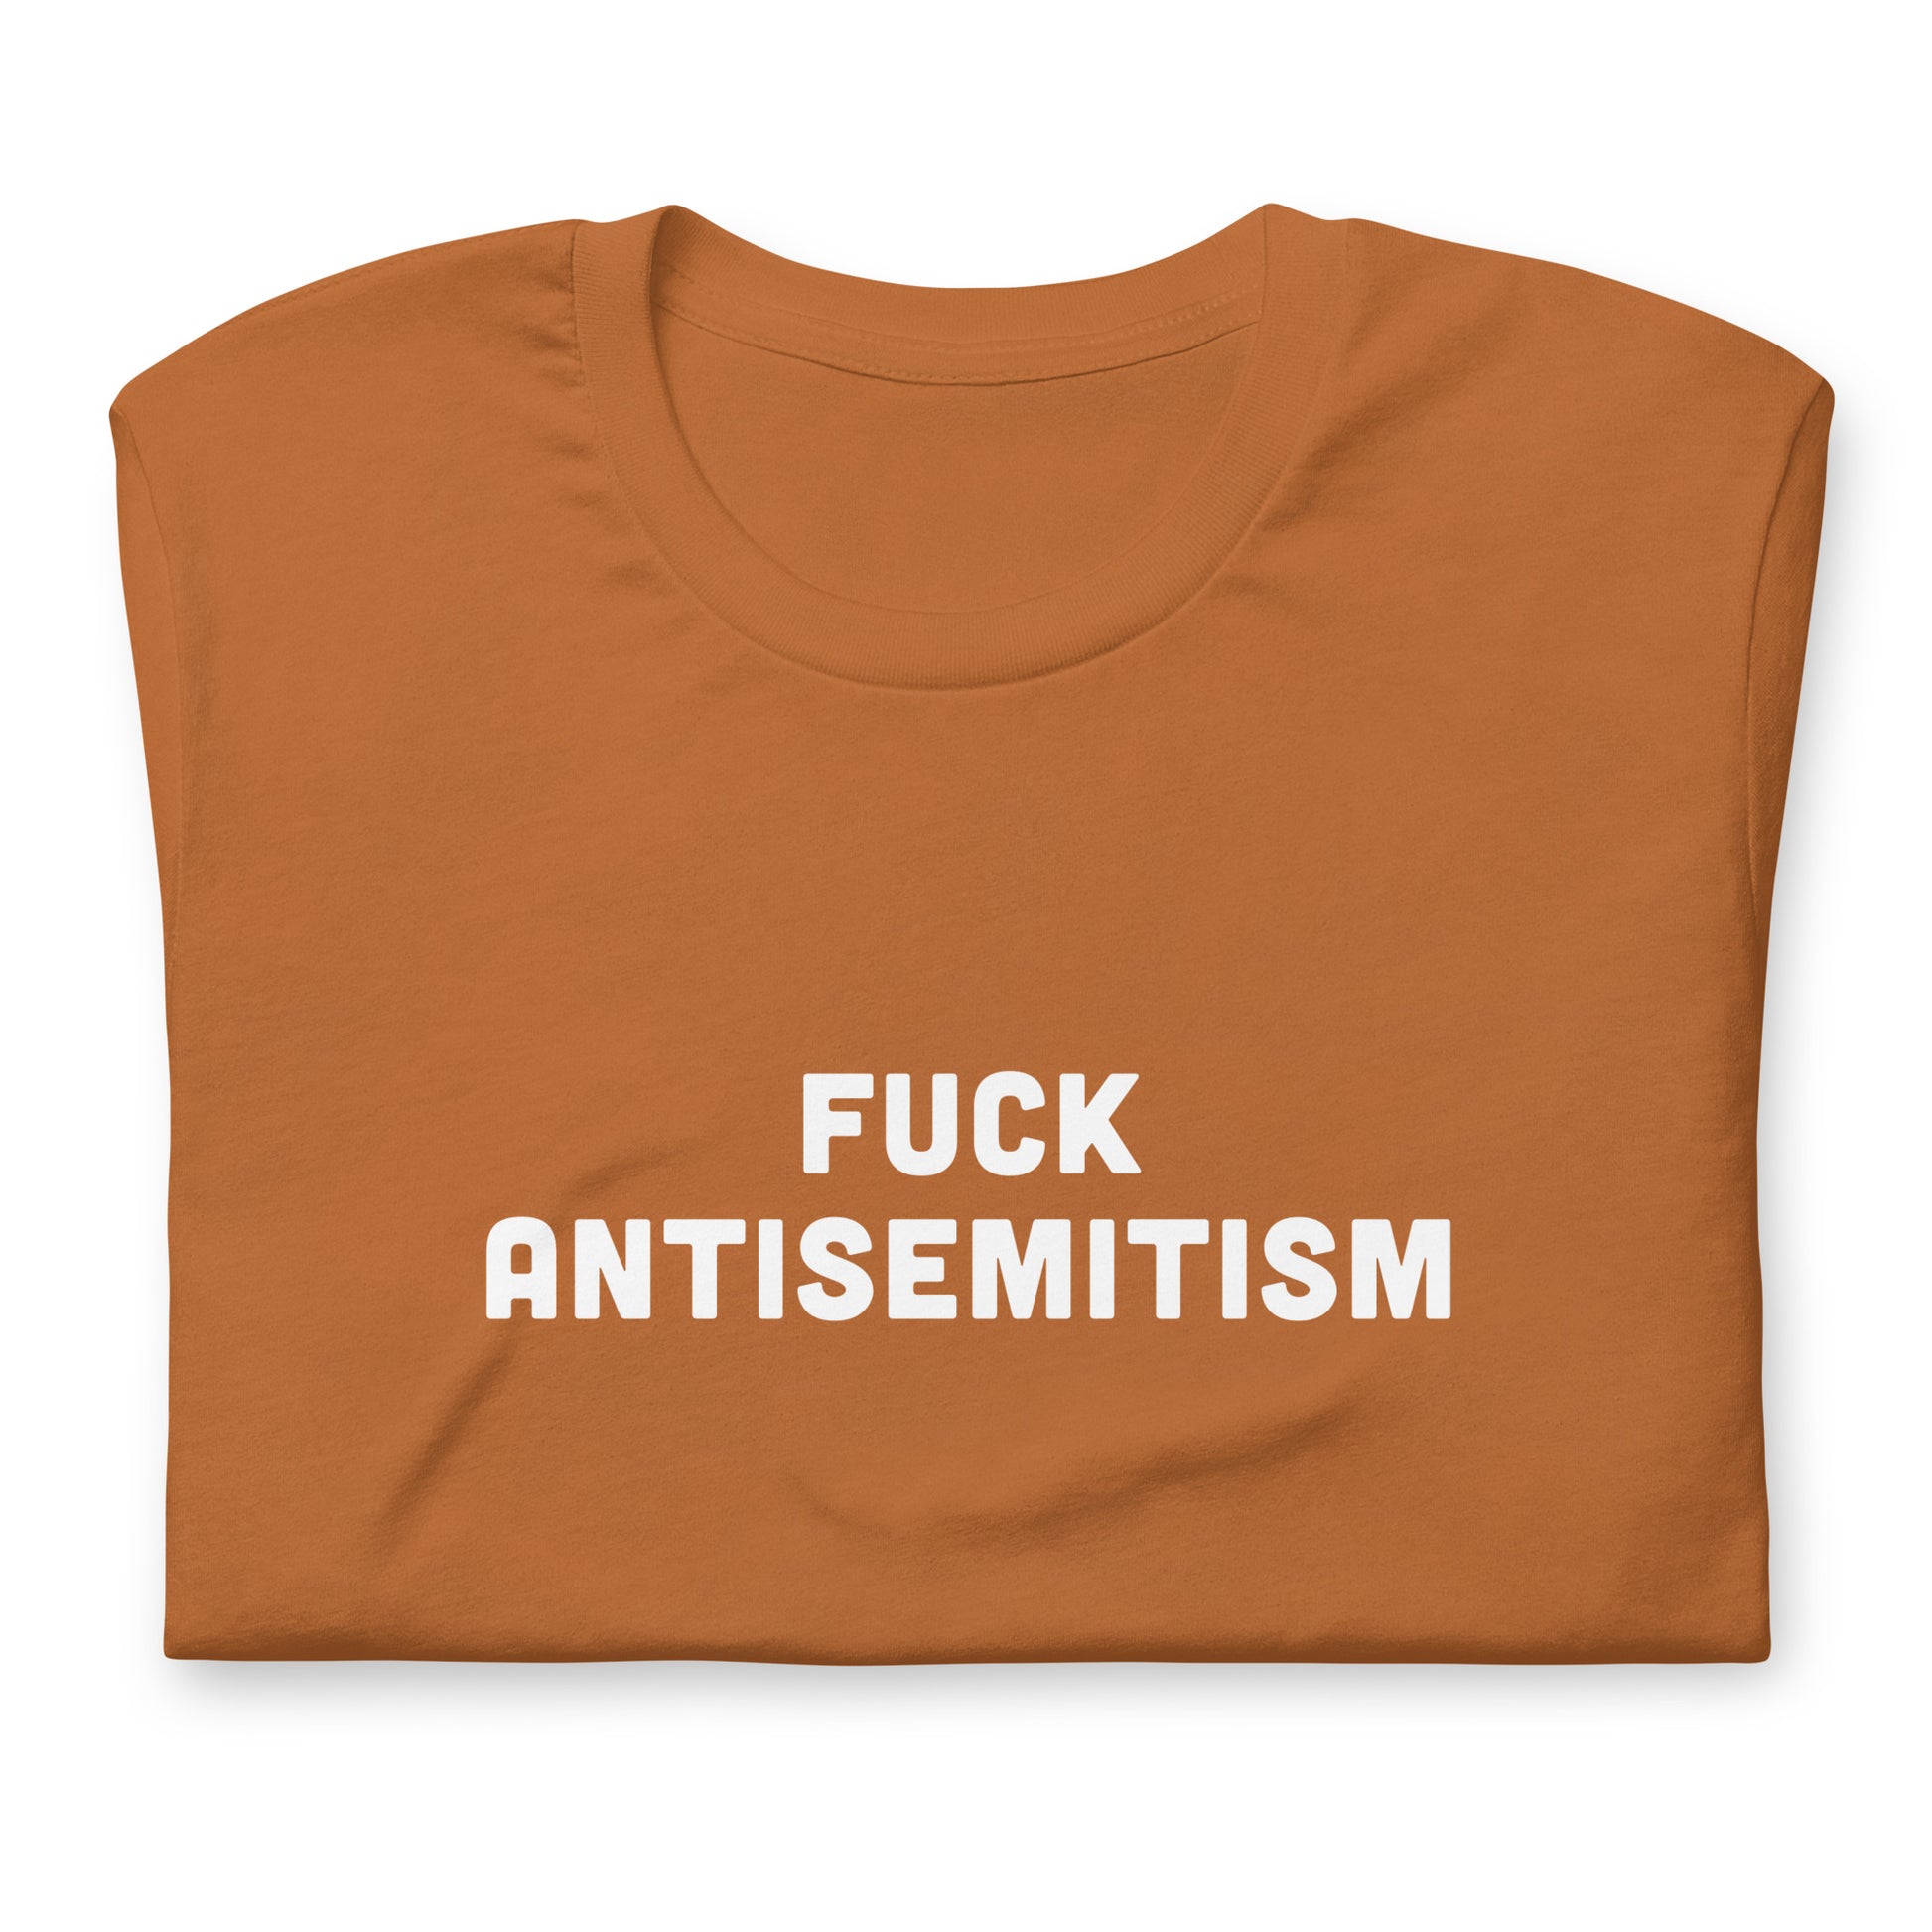 Fuck Antisemitism T-Shirt Size XL Color Navy